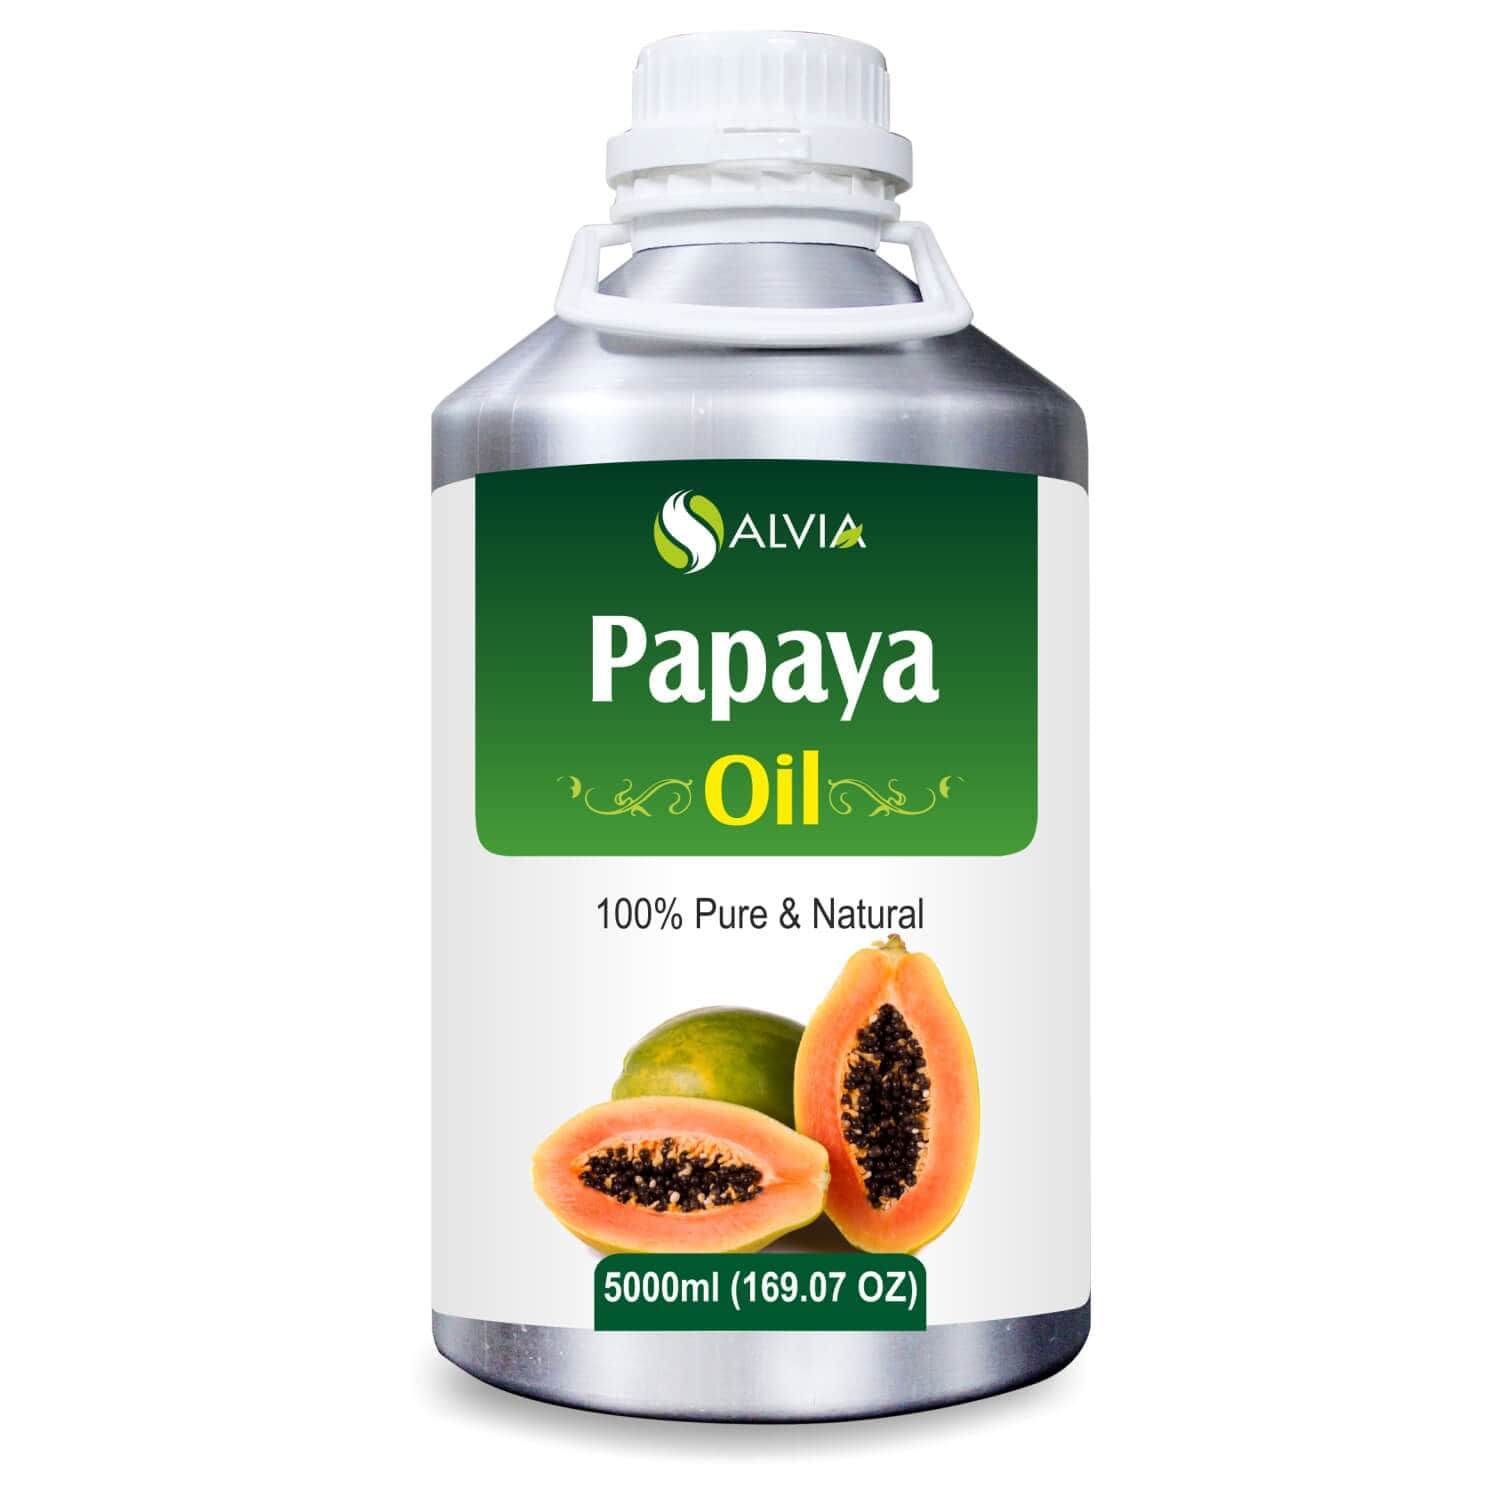 Salvia Natural Carrier Oils 5000ml Papaya Oil (Carica Papaya) 100% Pure & Natural Carrier Oil Nourishing & Moisturizing Property, Best For Skin, Hair, Lip, & Nail Care